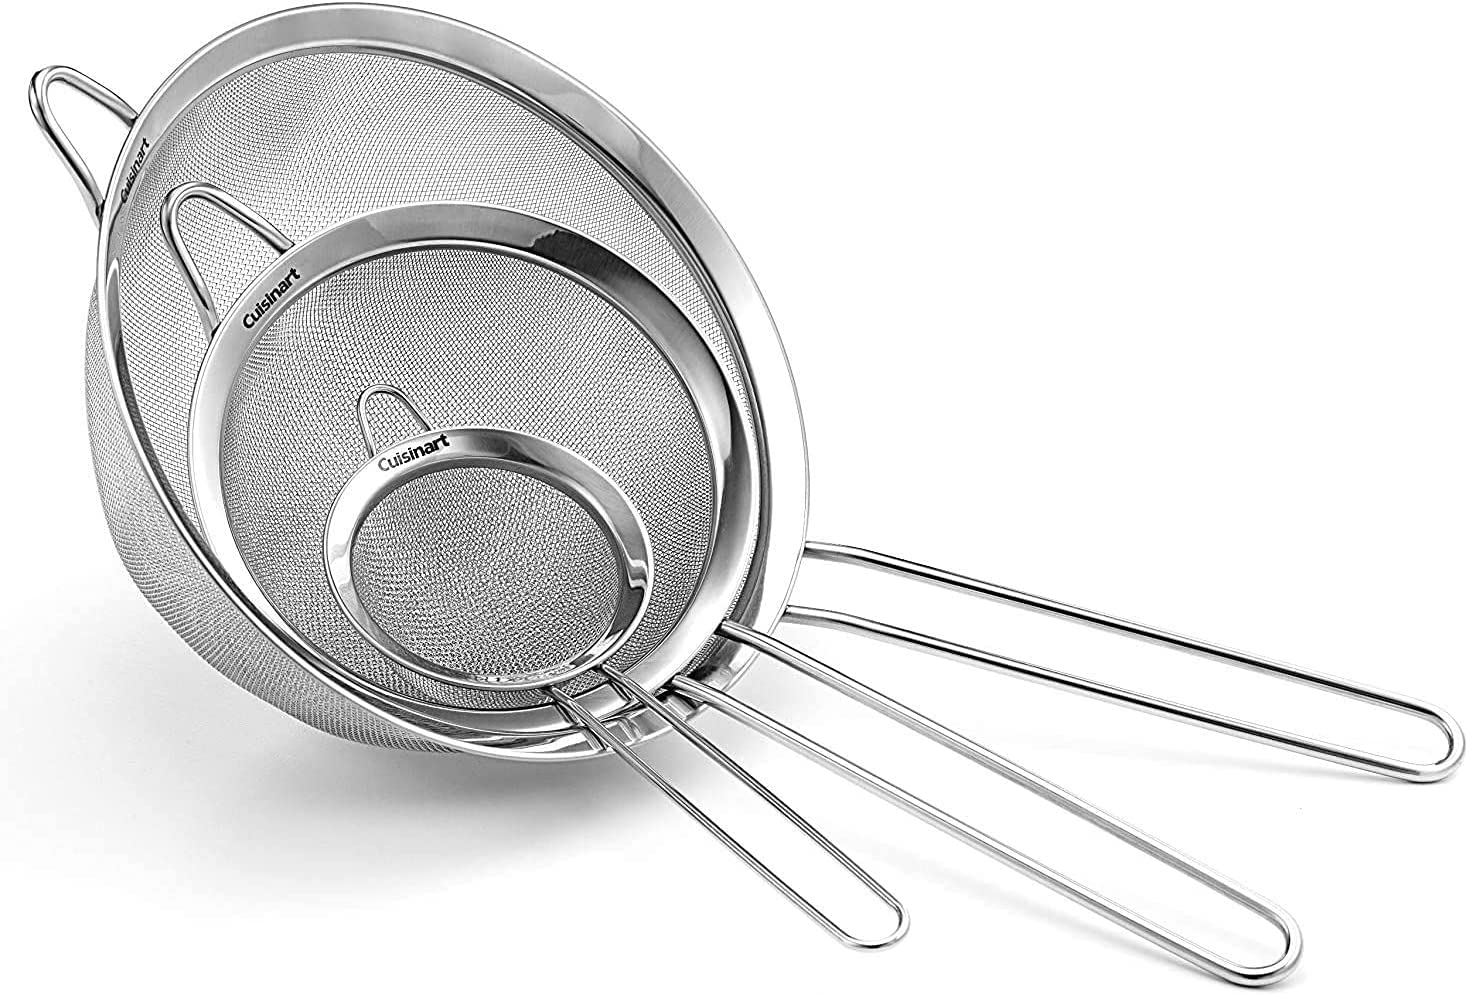 Cuisinart CTG-00-3MS Set of 3 Fine Set of Mesh Strainers, Stainless Steel, Pack of 3
